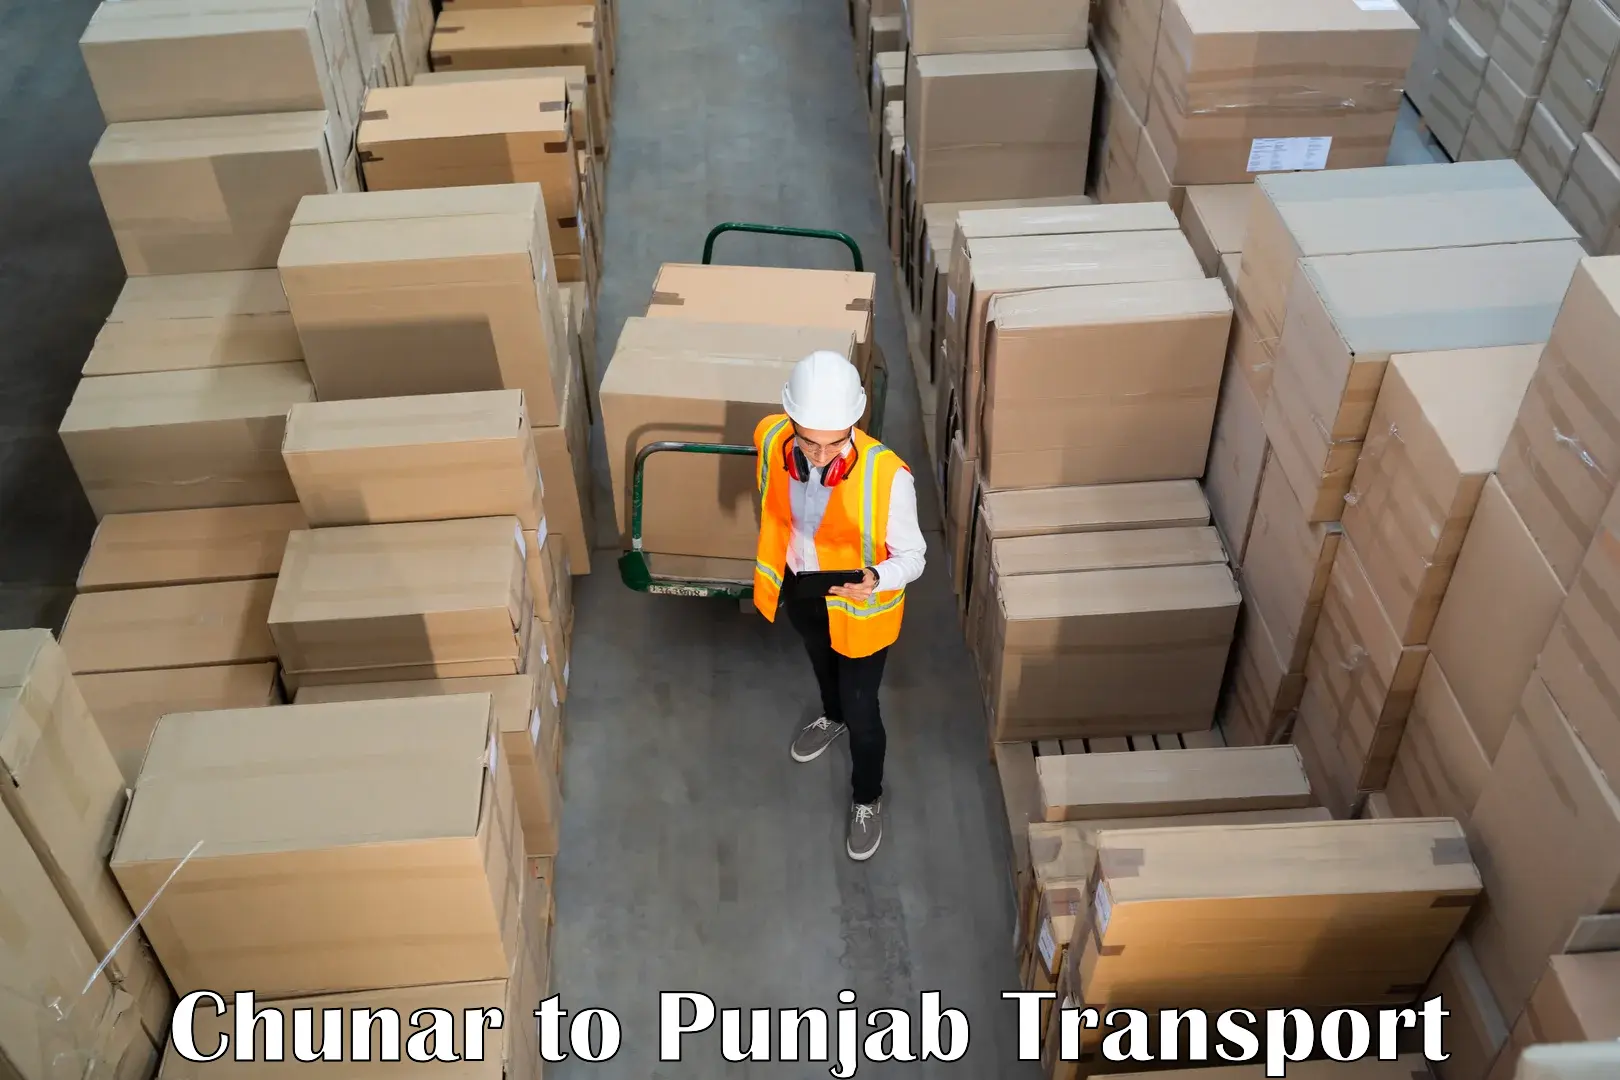 Online transport service Chunar to Malout